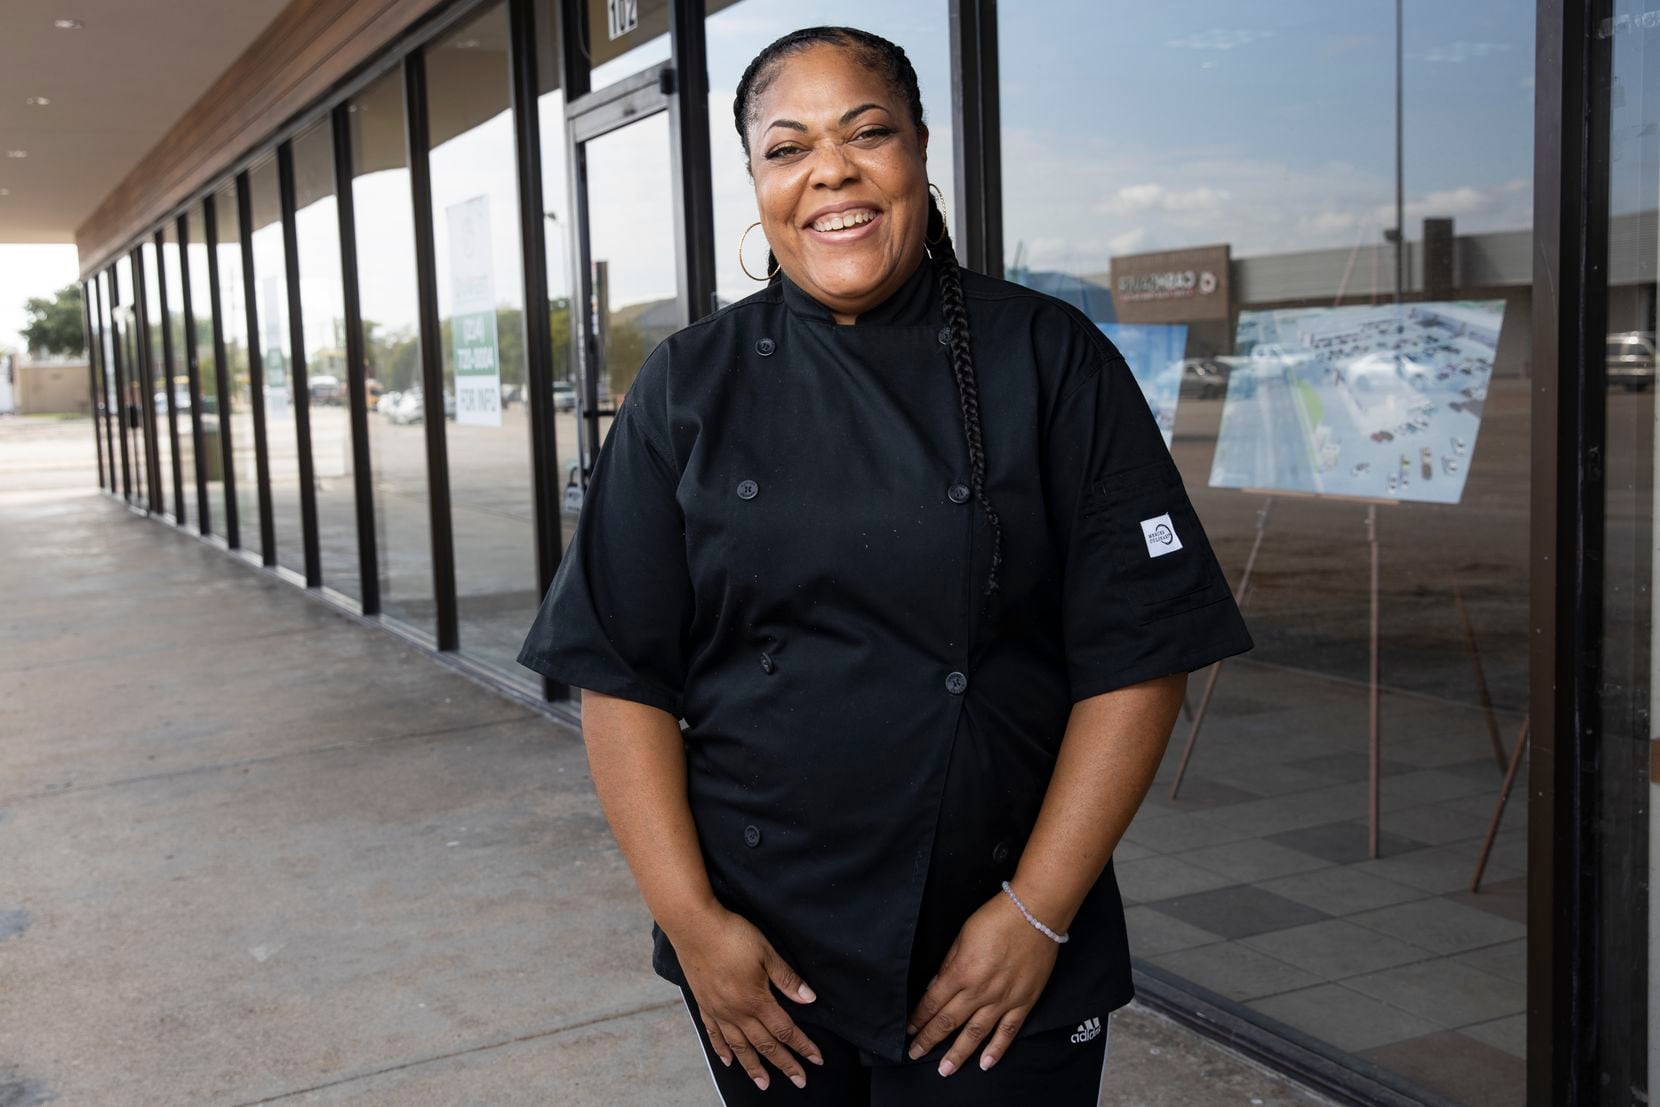 Chef Cynthia Nevels of Soulgood poses for a photo outside of the future site of her first brick and mortar restaurant on Sept. 4, 2020 in West Dallas. (Juan Figueroa/ The Dallas Morning News)